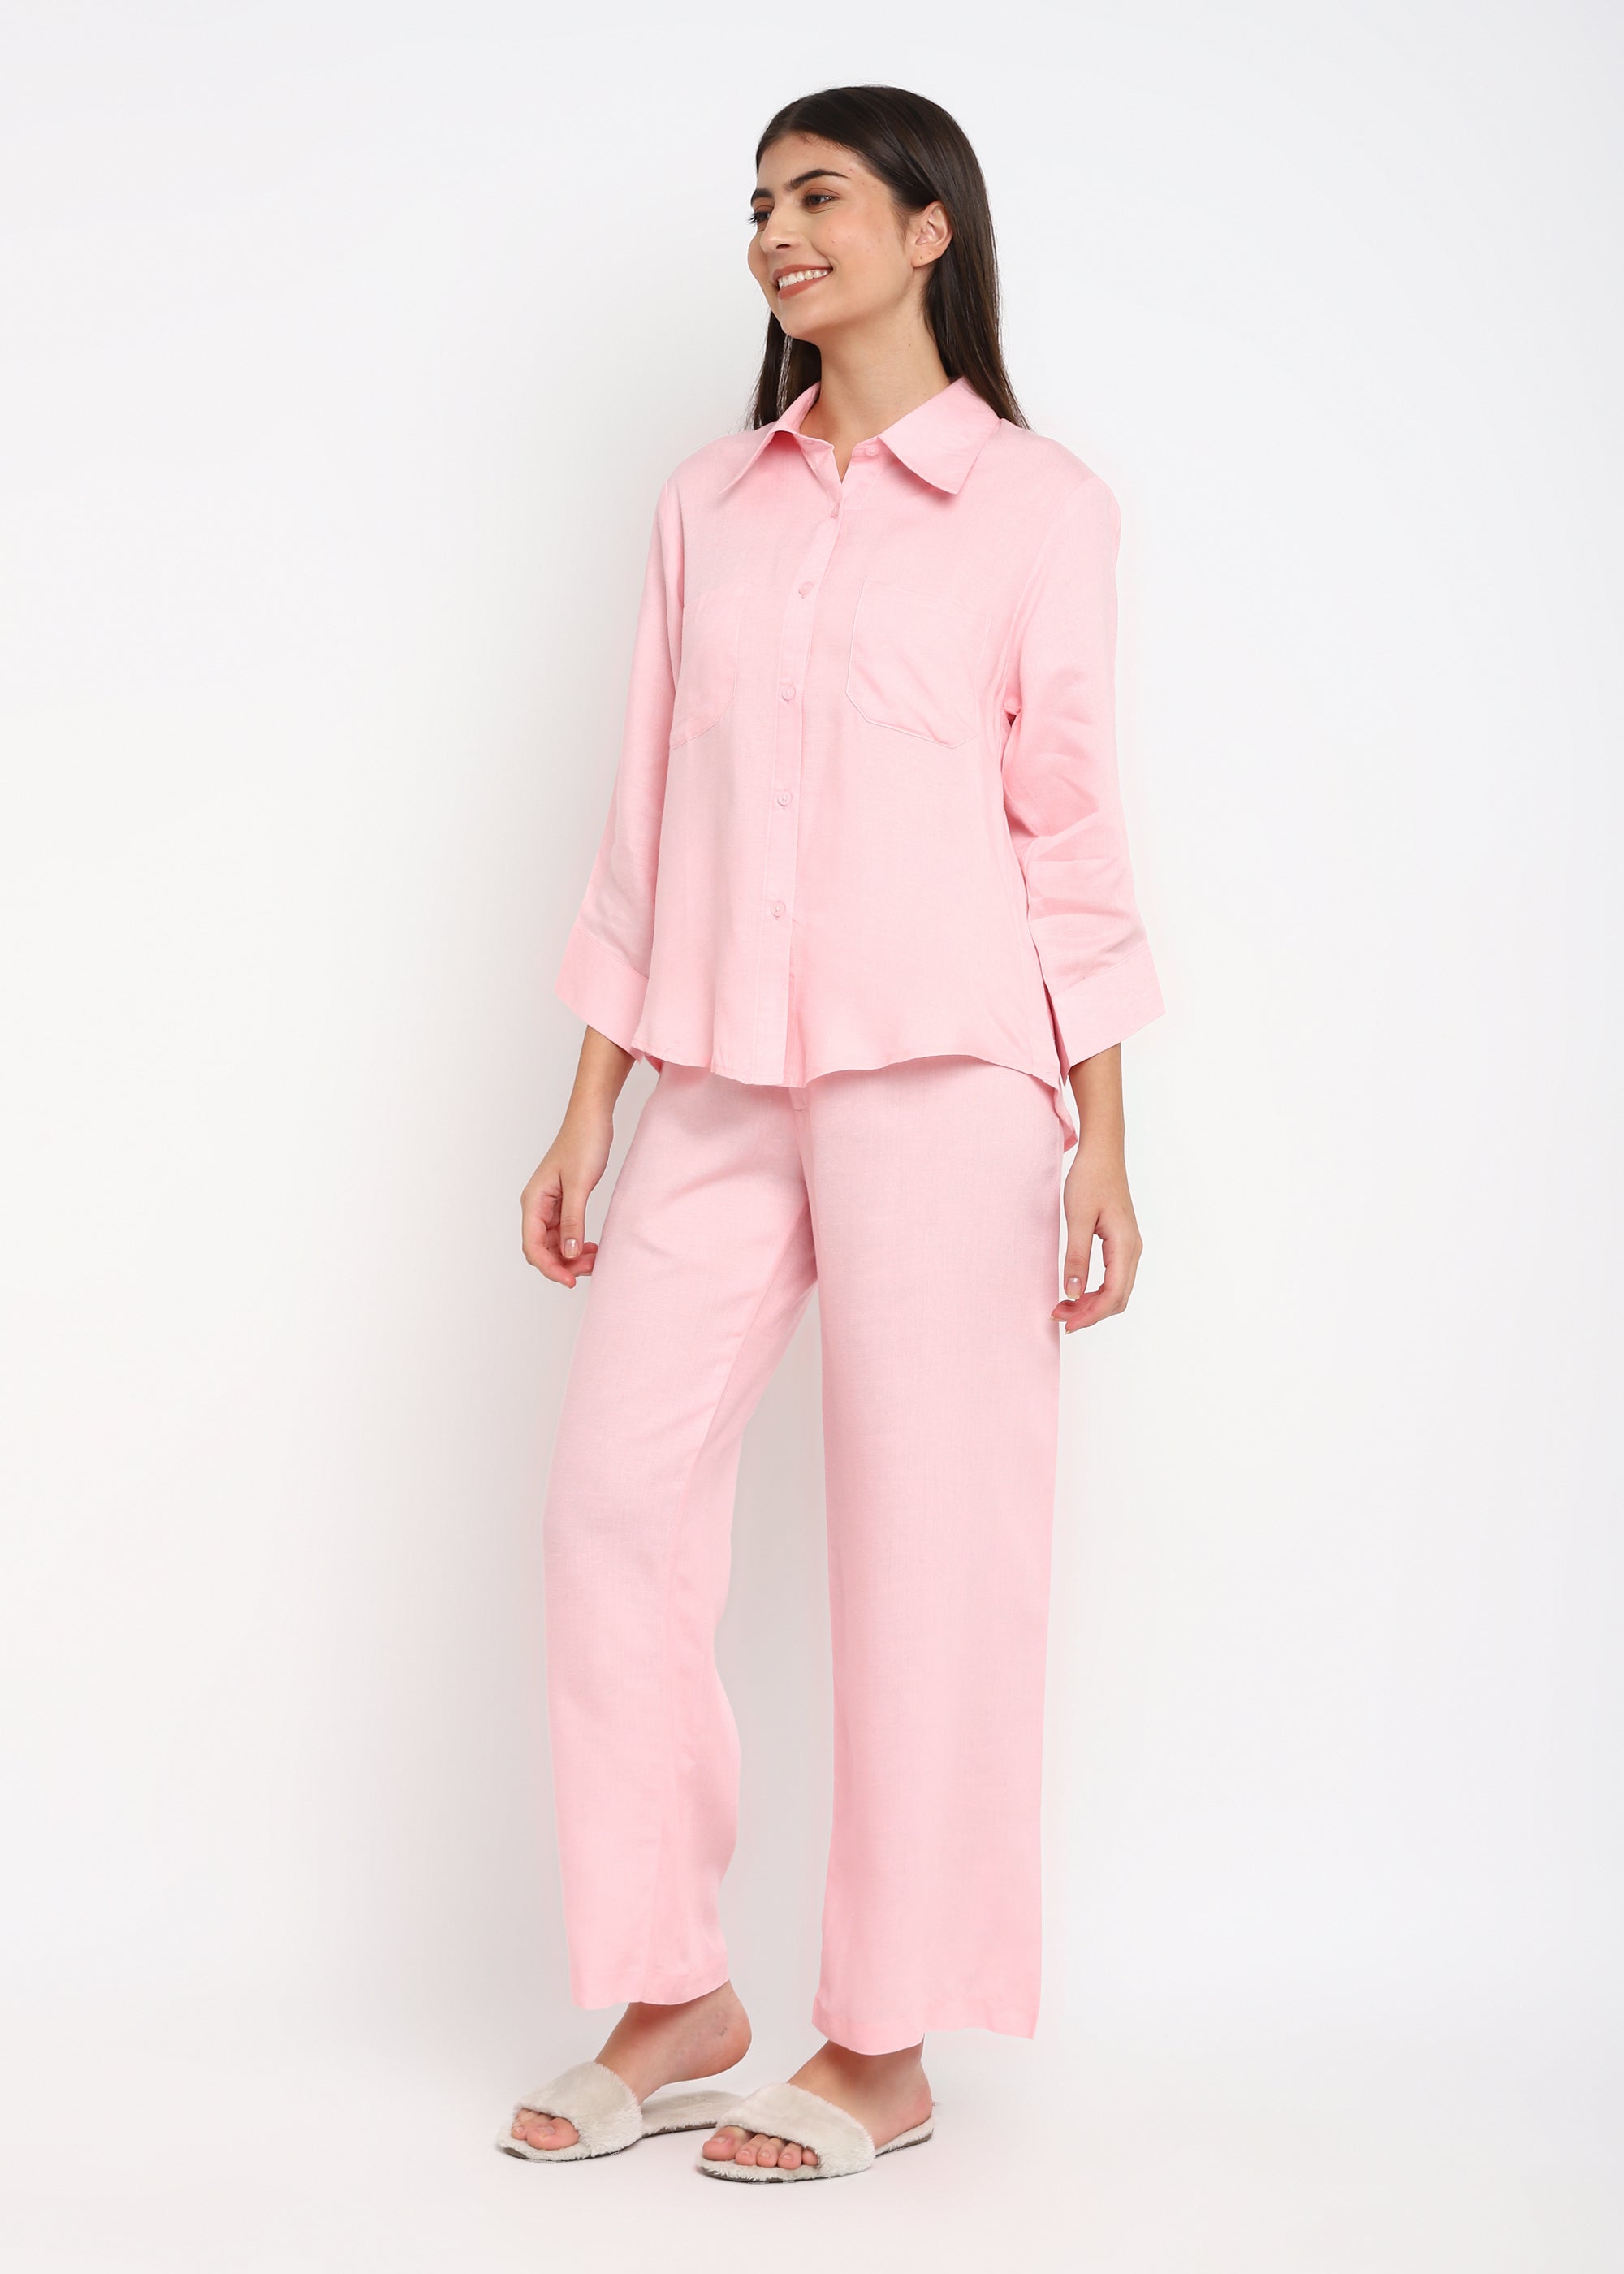 Baby Pink Cotton Women's Coord Set